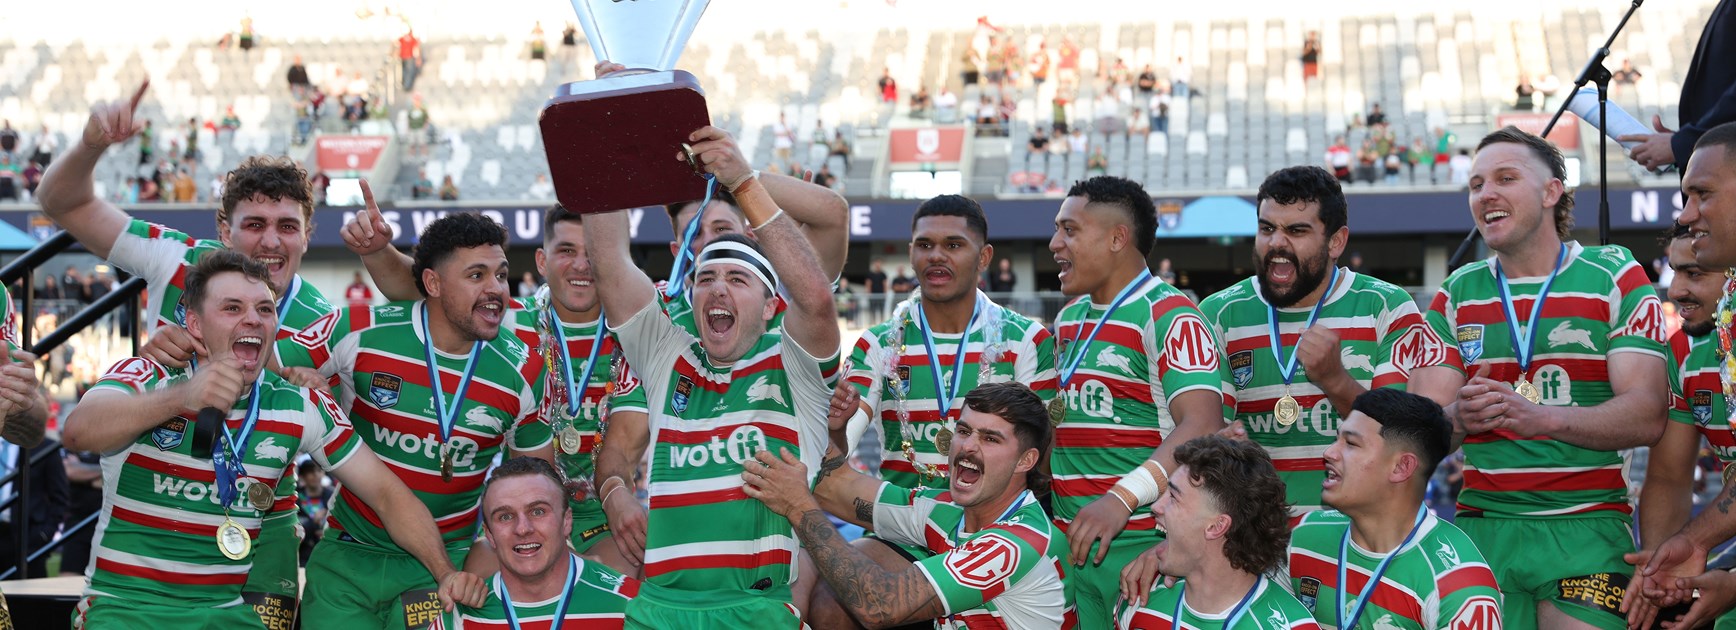 Rabbitohs raise the NSW Cup again after 40 years